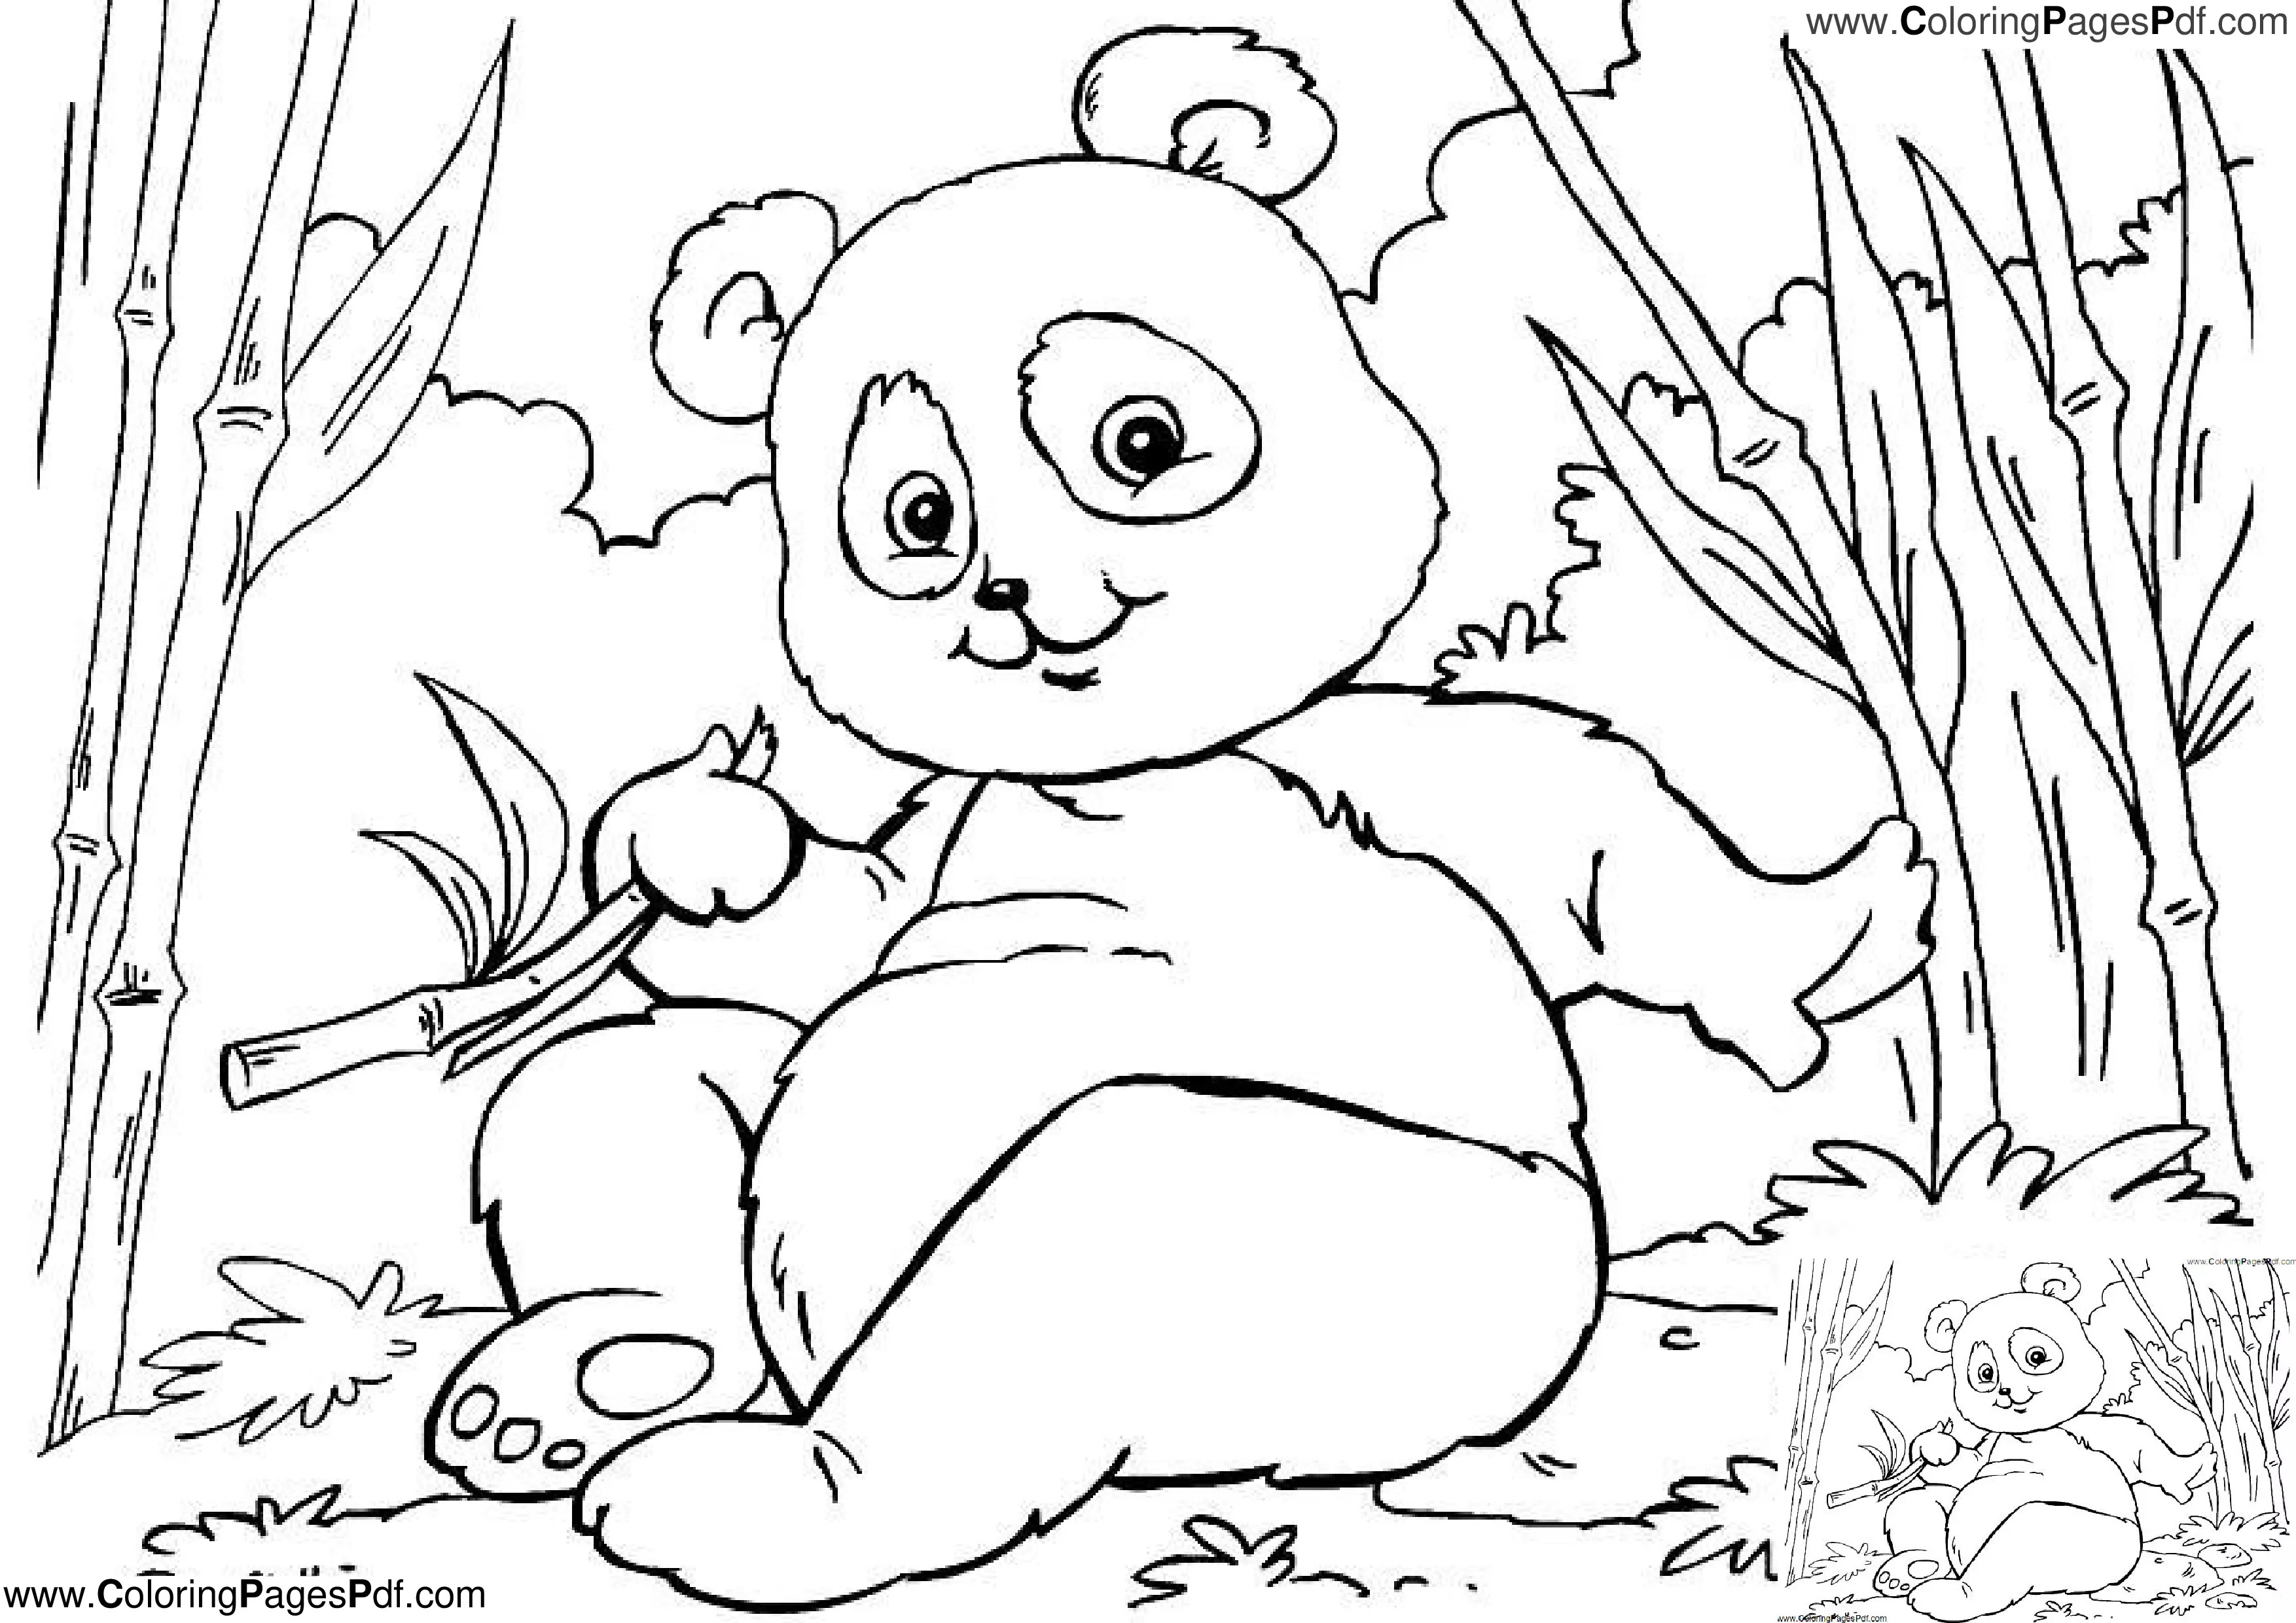 Realistic panda coloring pages